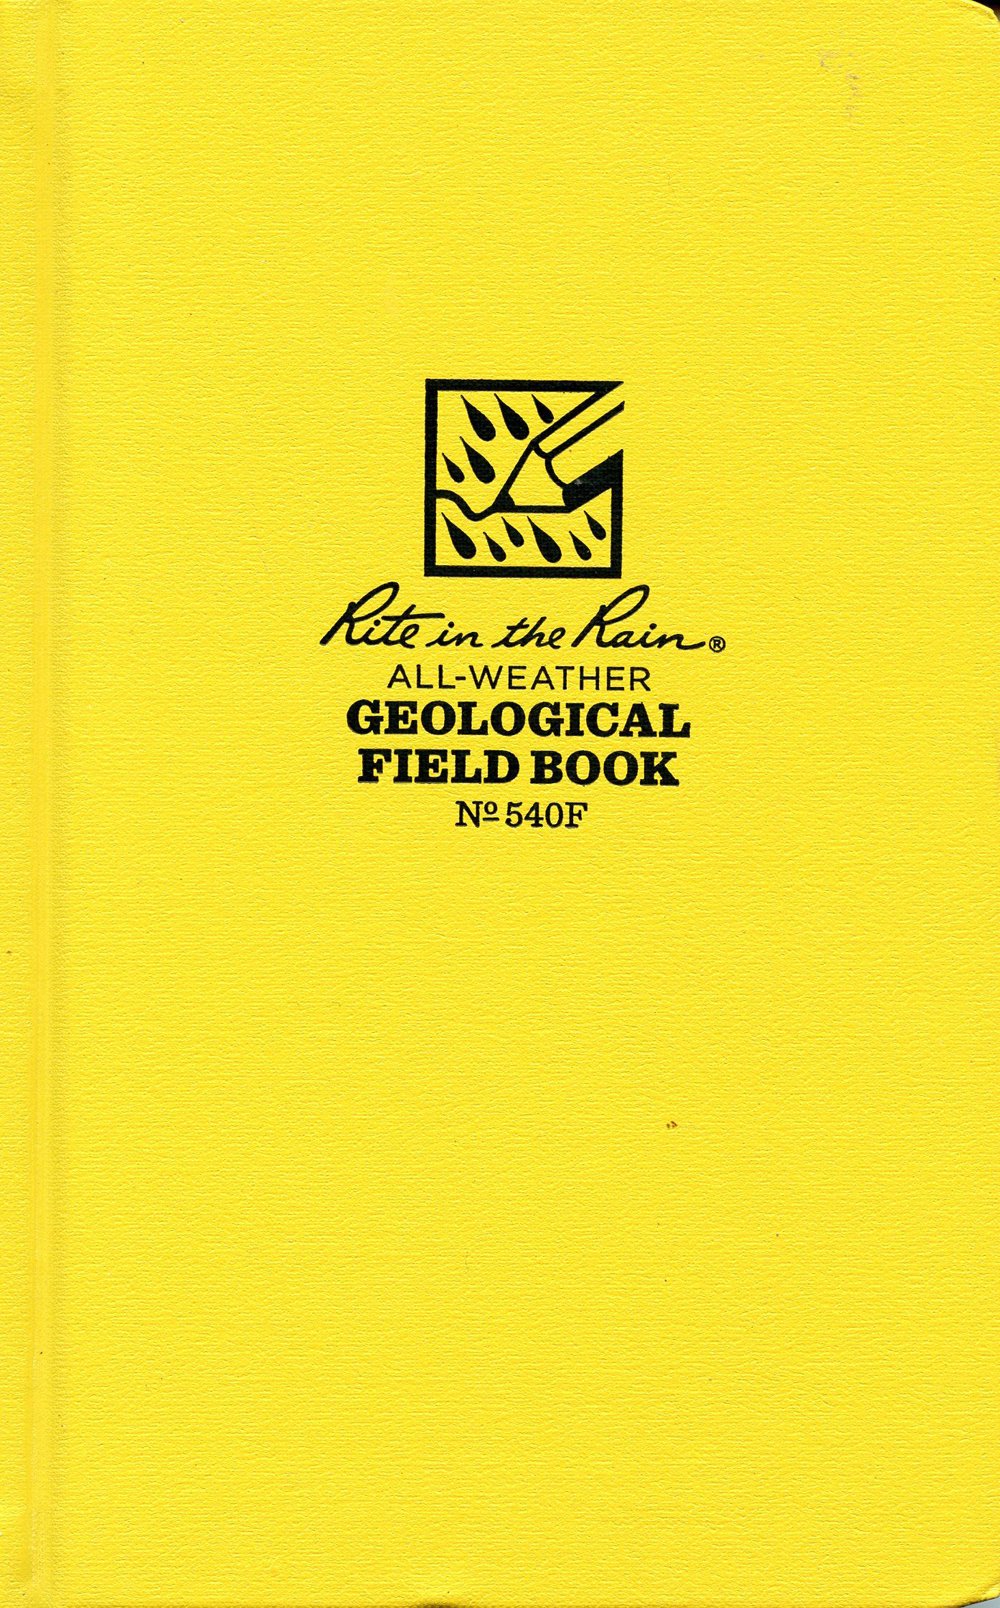 All-Weather Geology Field Book (Rite-In-The-Rain®)